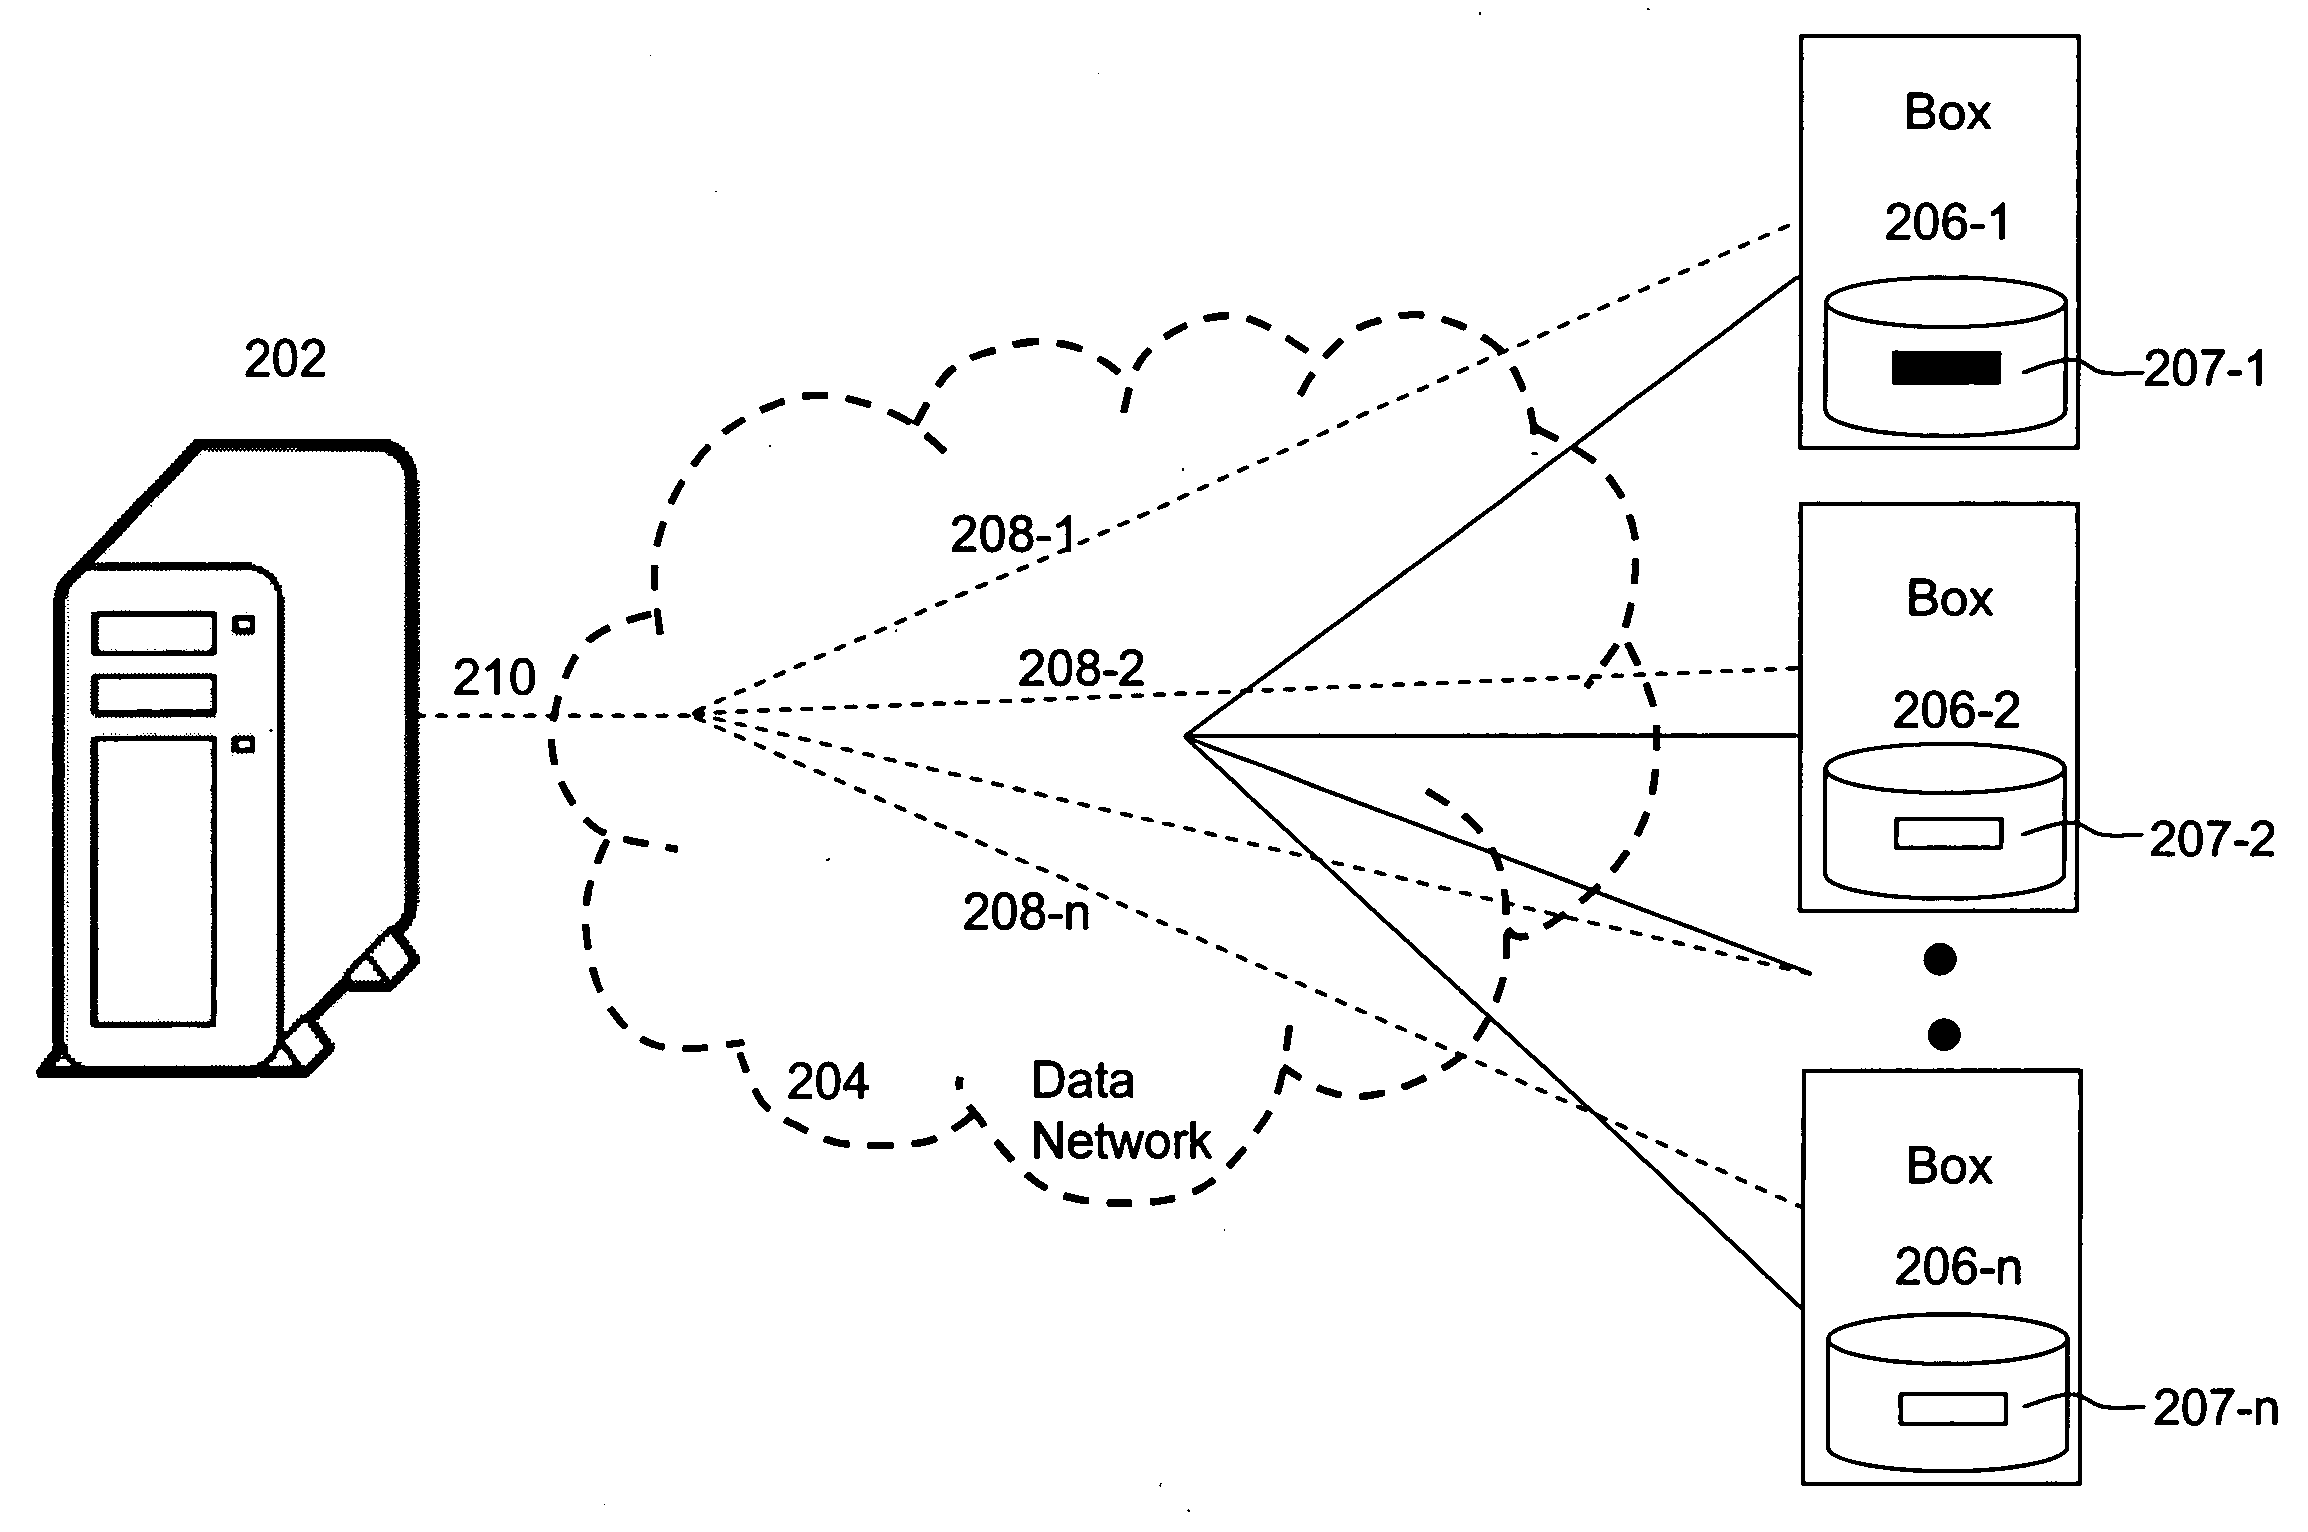 Access control of media services over an open network